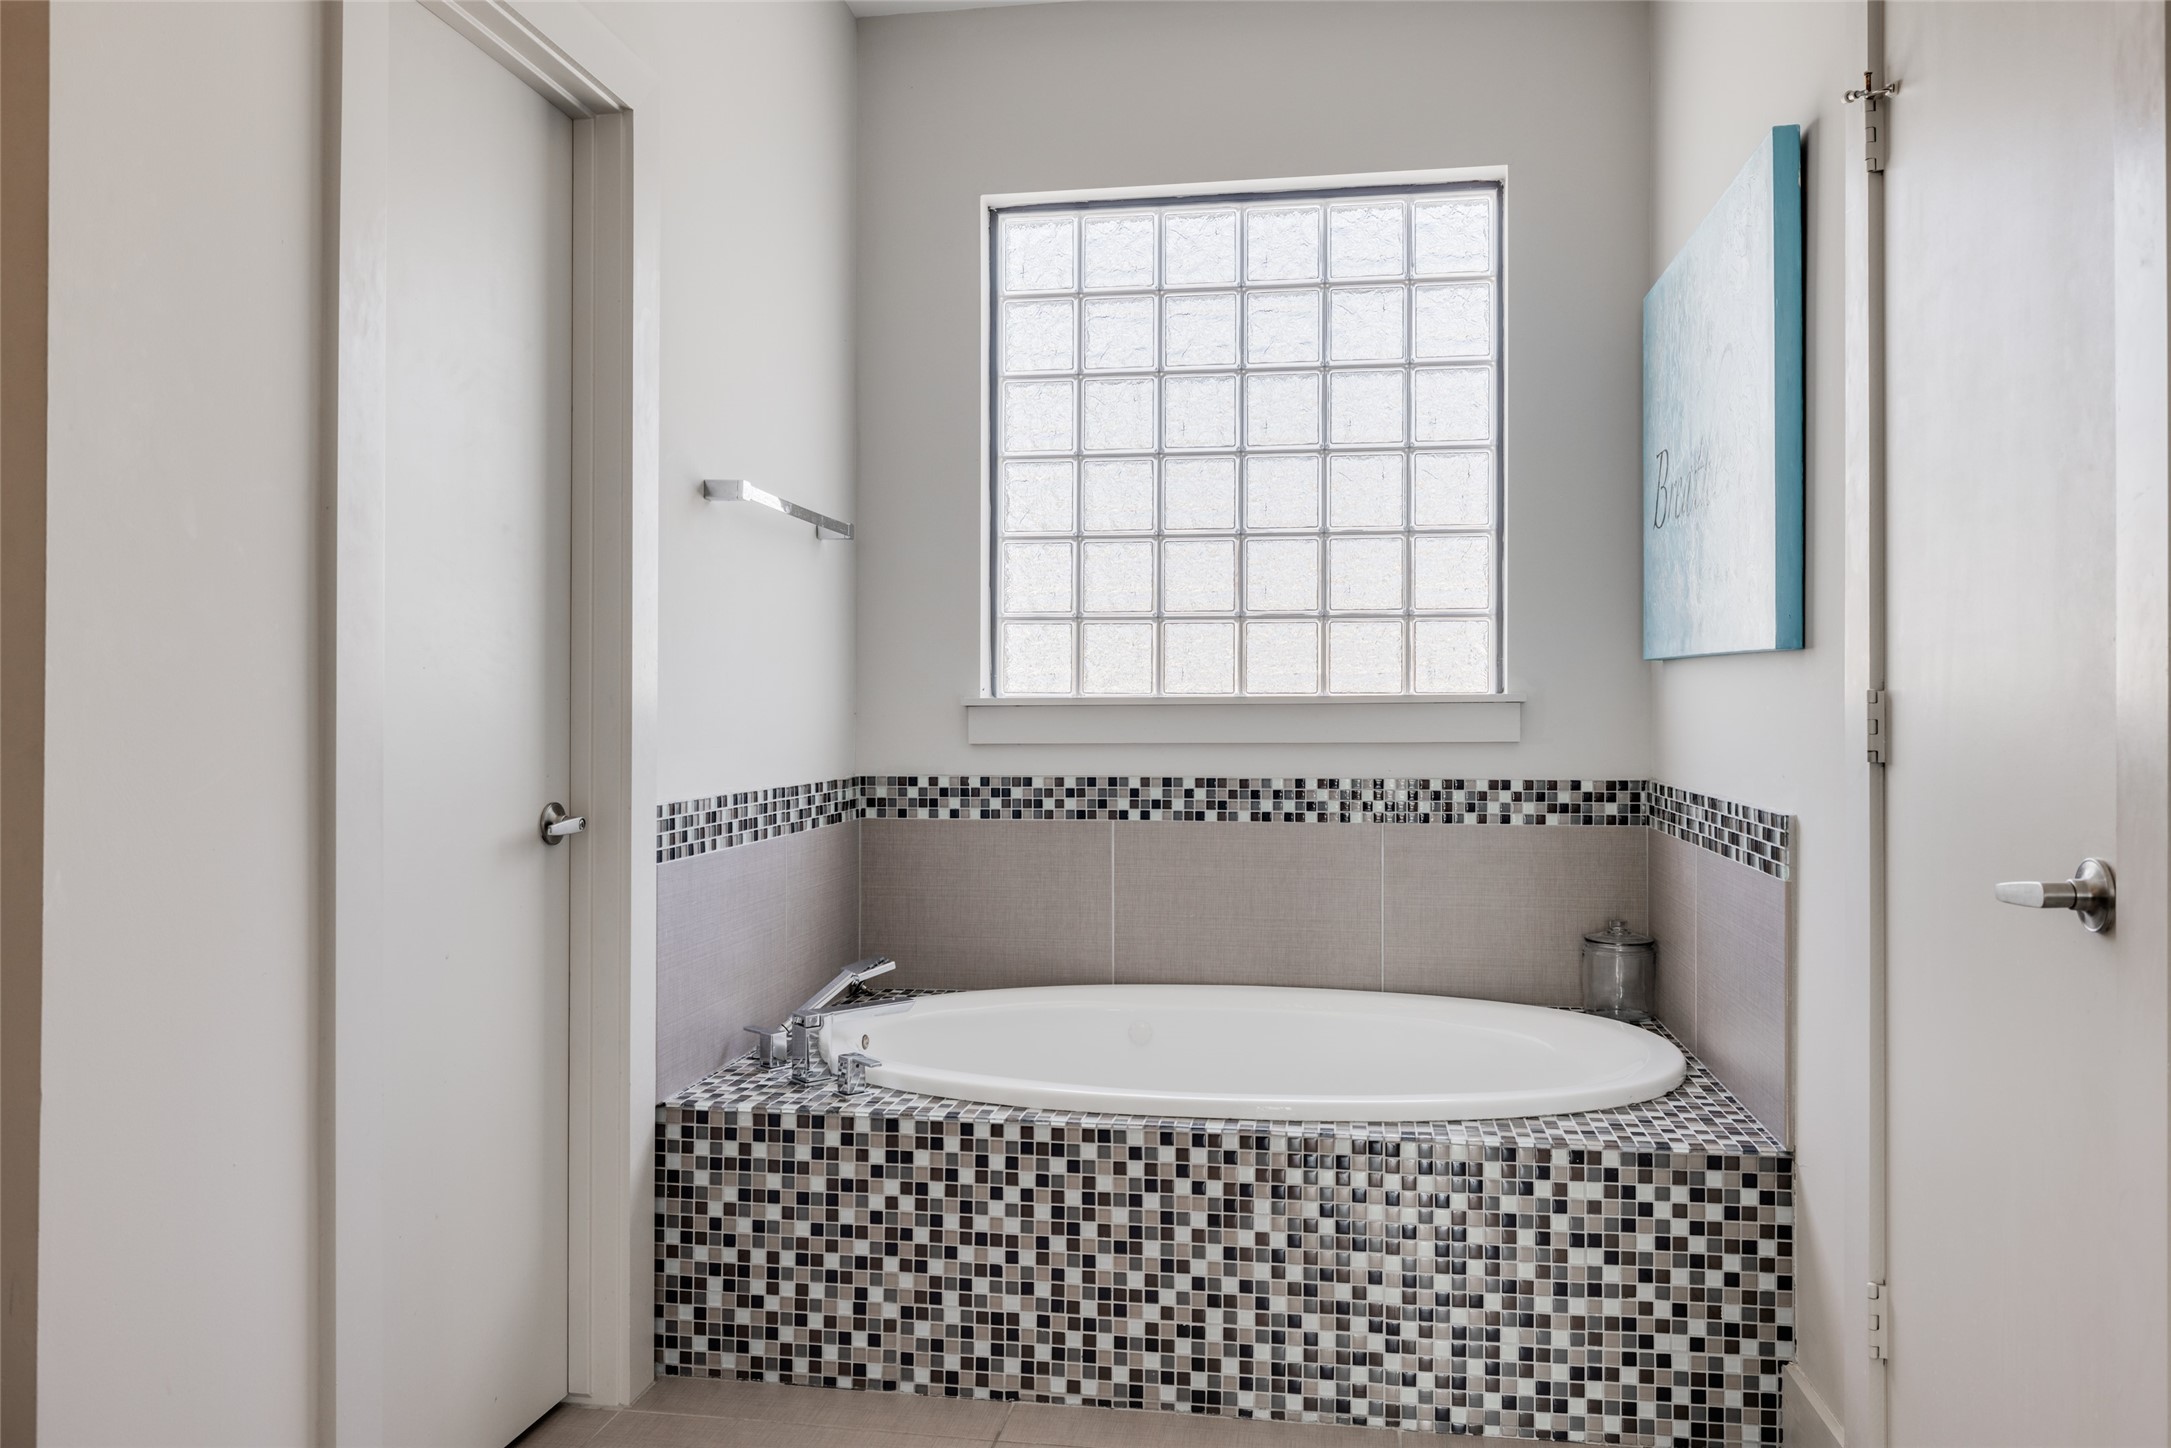 Luxurious Primary Bathroom with large soaking whirlpool tub, separate walk in shower, beautiful Carrera marble counters & mosaic tile bath surround, window gives lots of natural light, 2 separate large closets